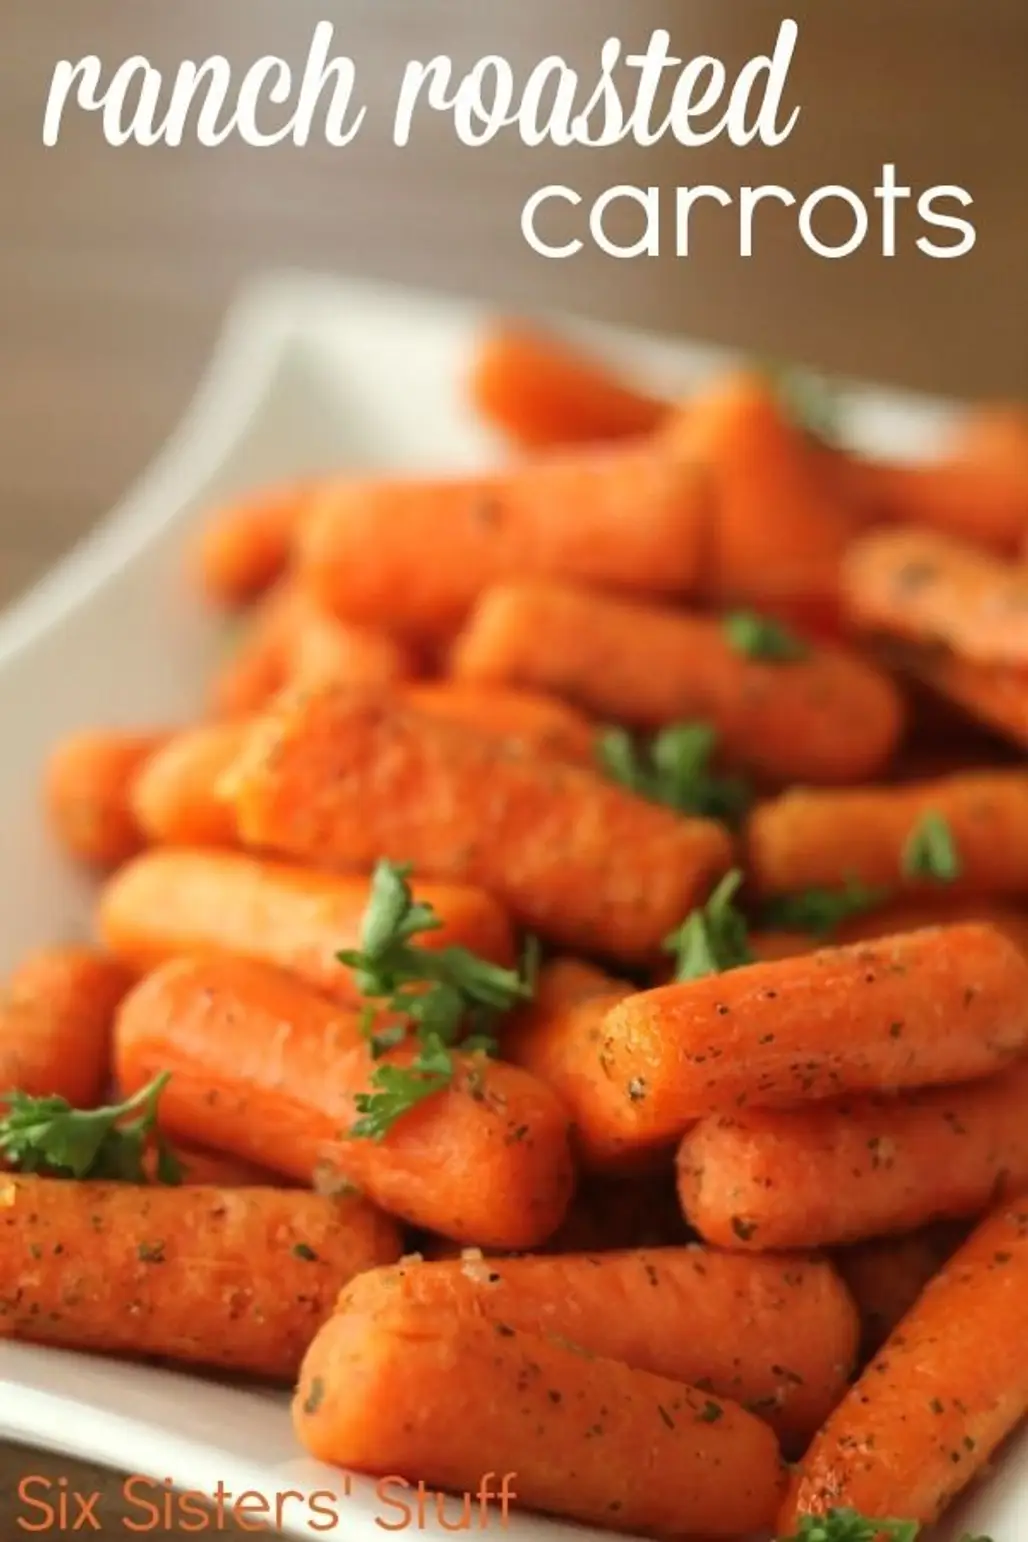 Ranch Roasted Carrots